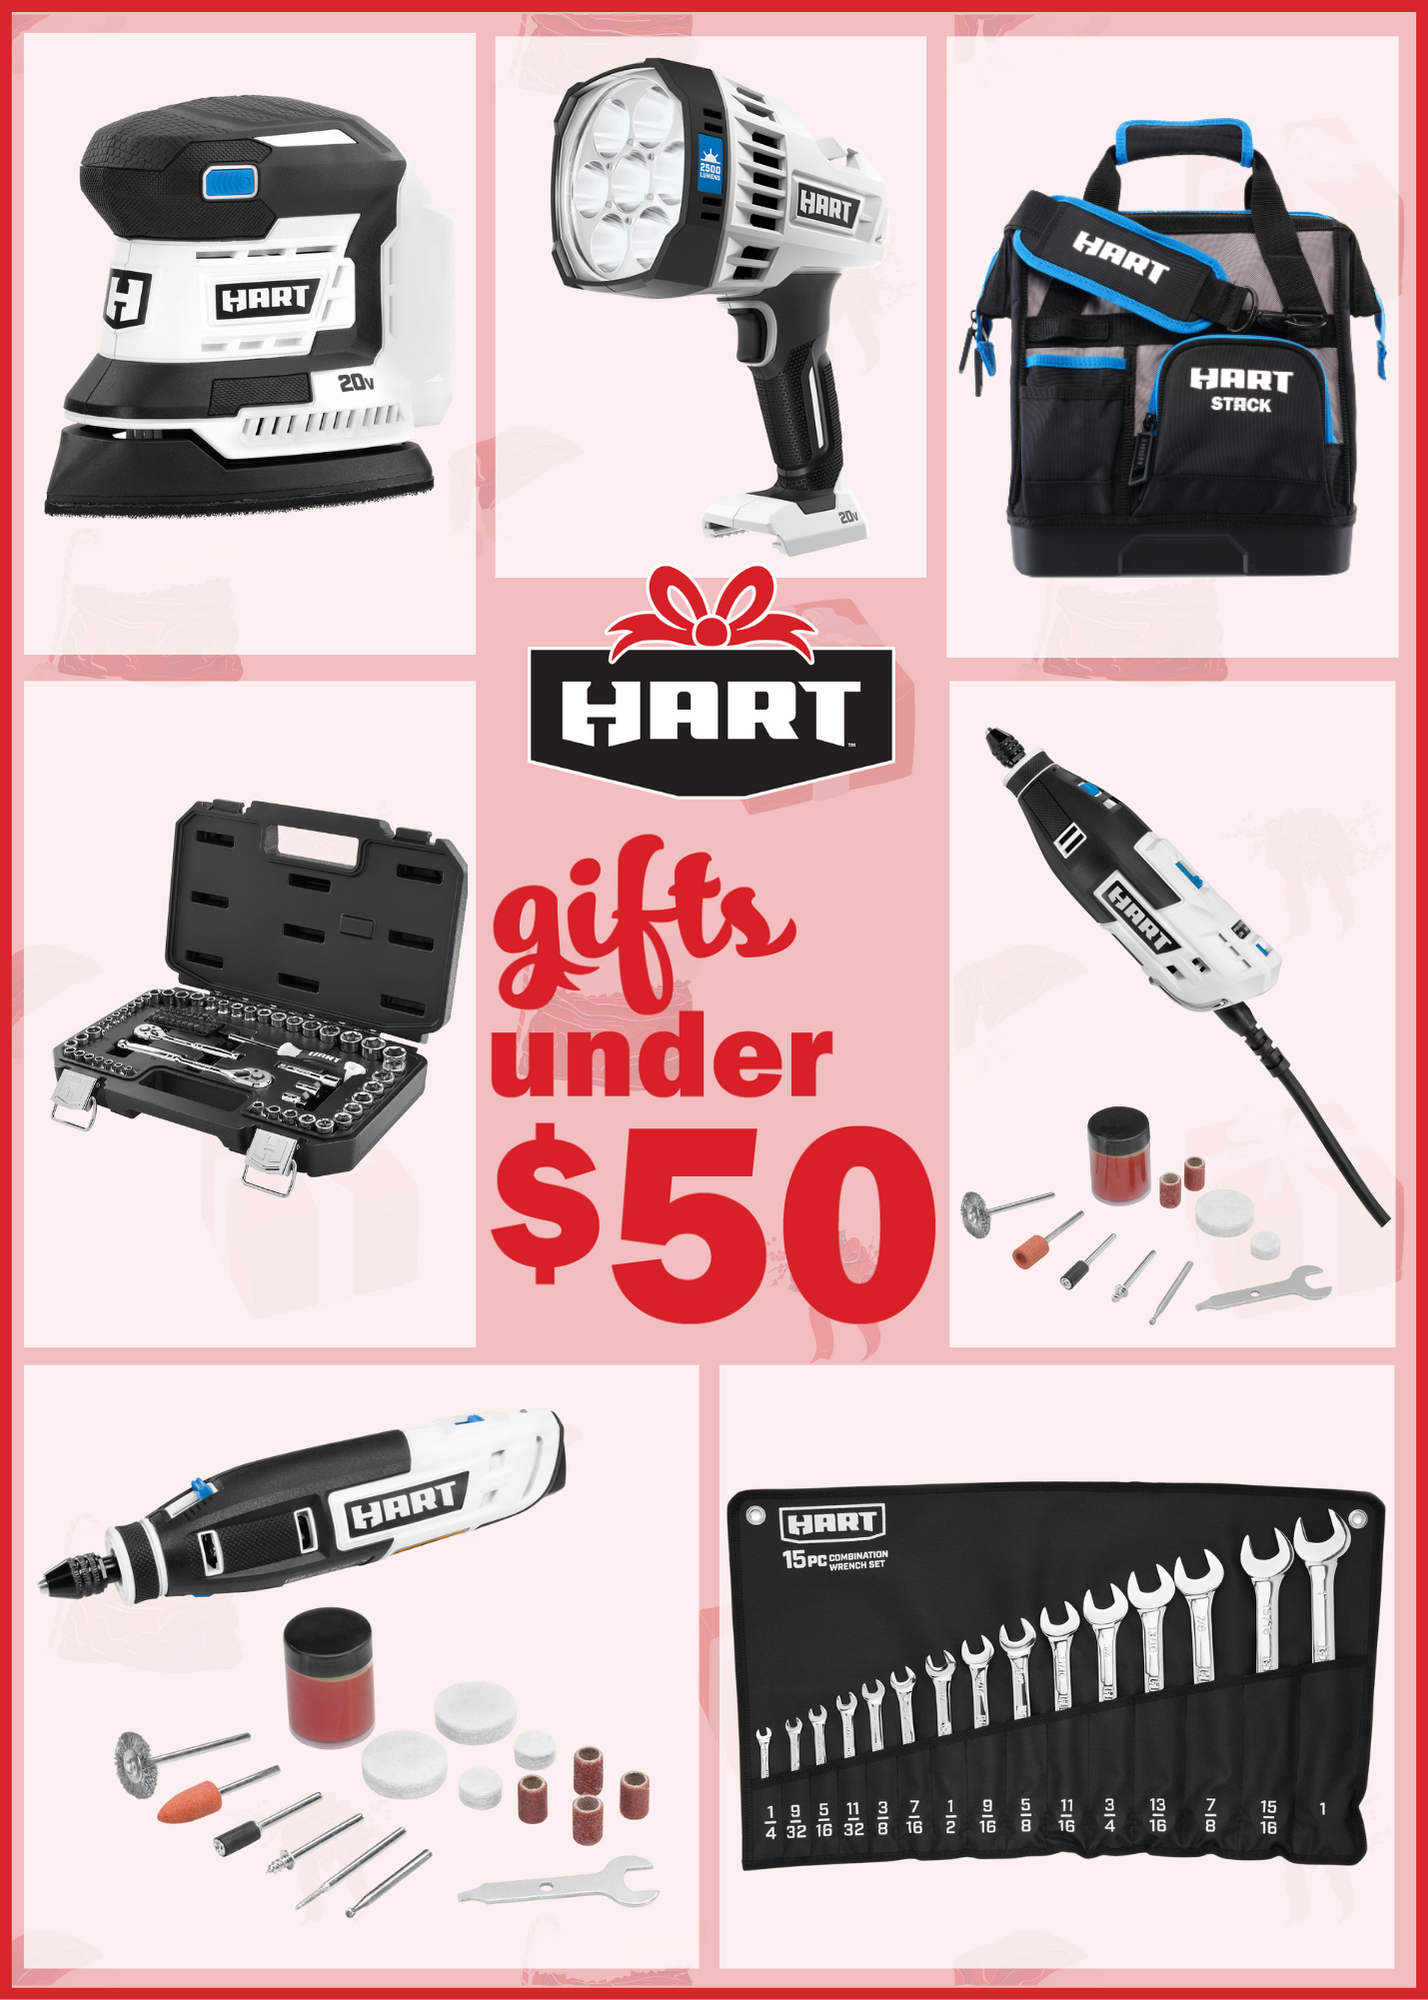 HART Tools Guide to Find the Best Cordless Power Tool and Hand Tool Gifts under $50